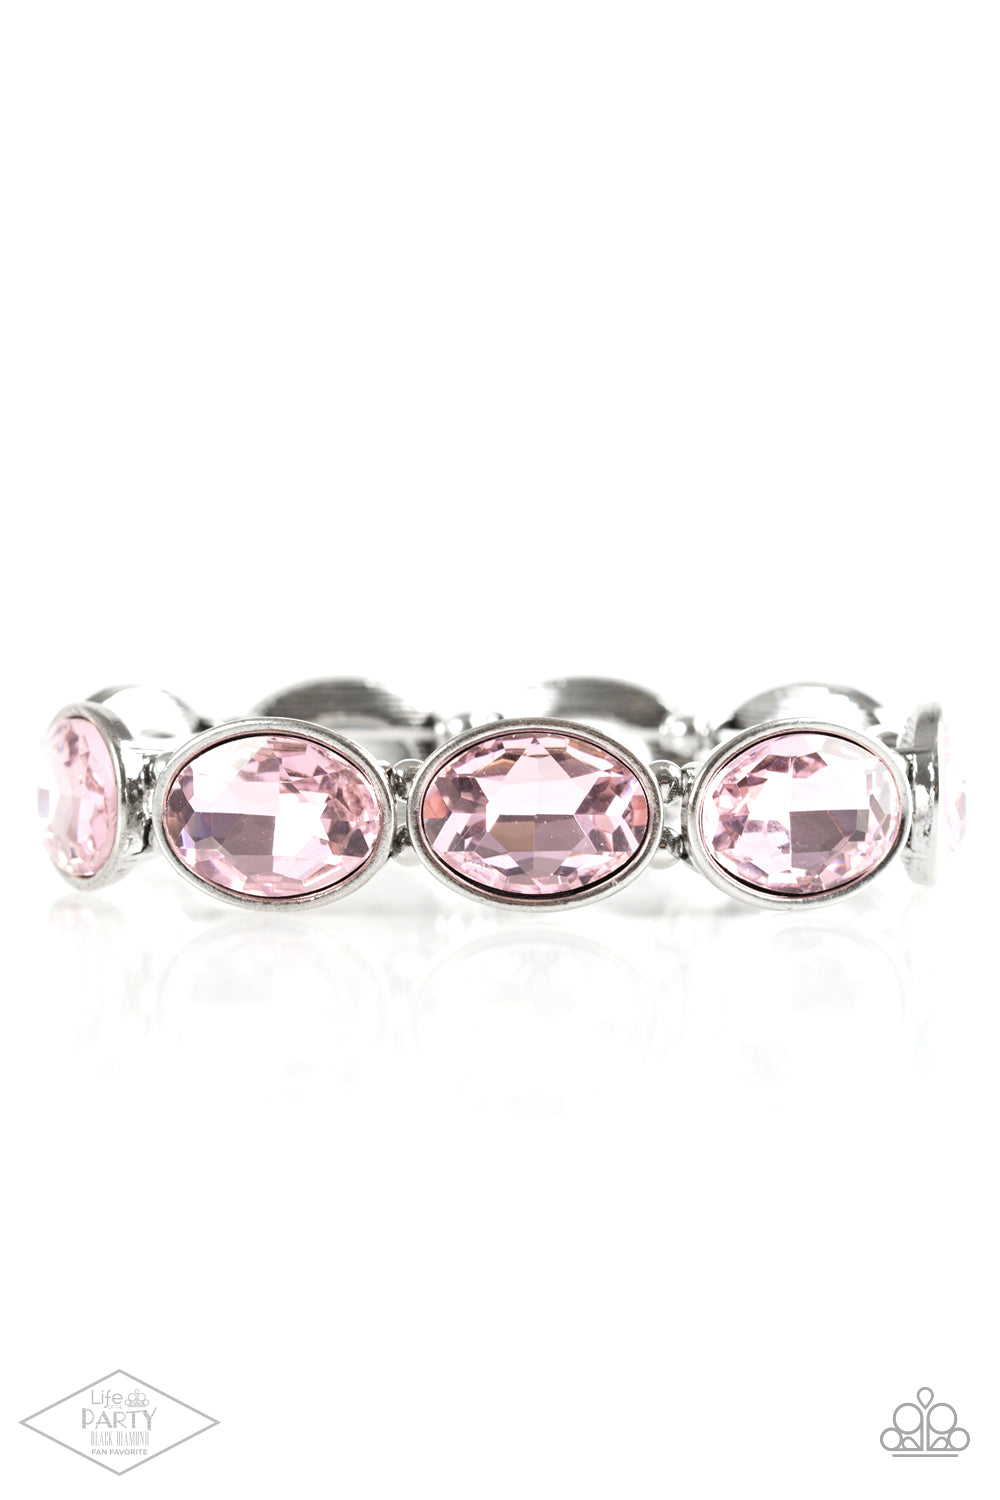 DIVA In Disguise Pink Bracelet - Paparazzi Accessories  Glassy pink gems are pressed into sleek silver frames. Infused with dainty silver beads, the glittery frames are threaded along stretchy elastic bands for a glamorous look around the wrist.  Sold as one individual bracelet. This Fan Favorite is back in the spotlight at the request of our 2021 Life of the Party member with Black Diamond Access, Valerie H.